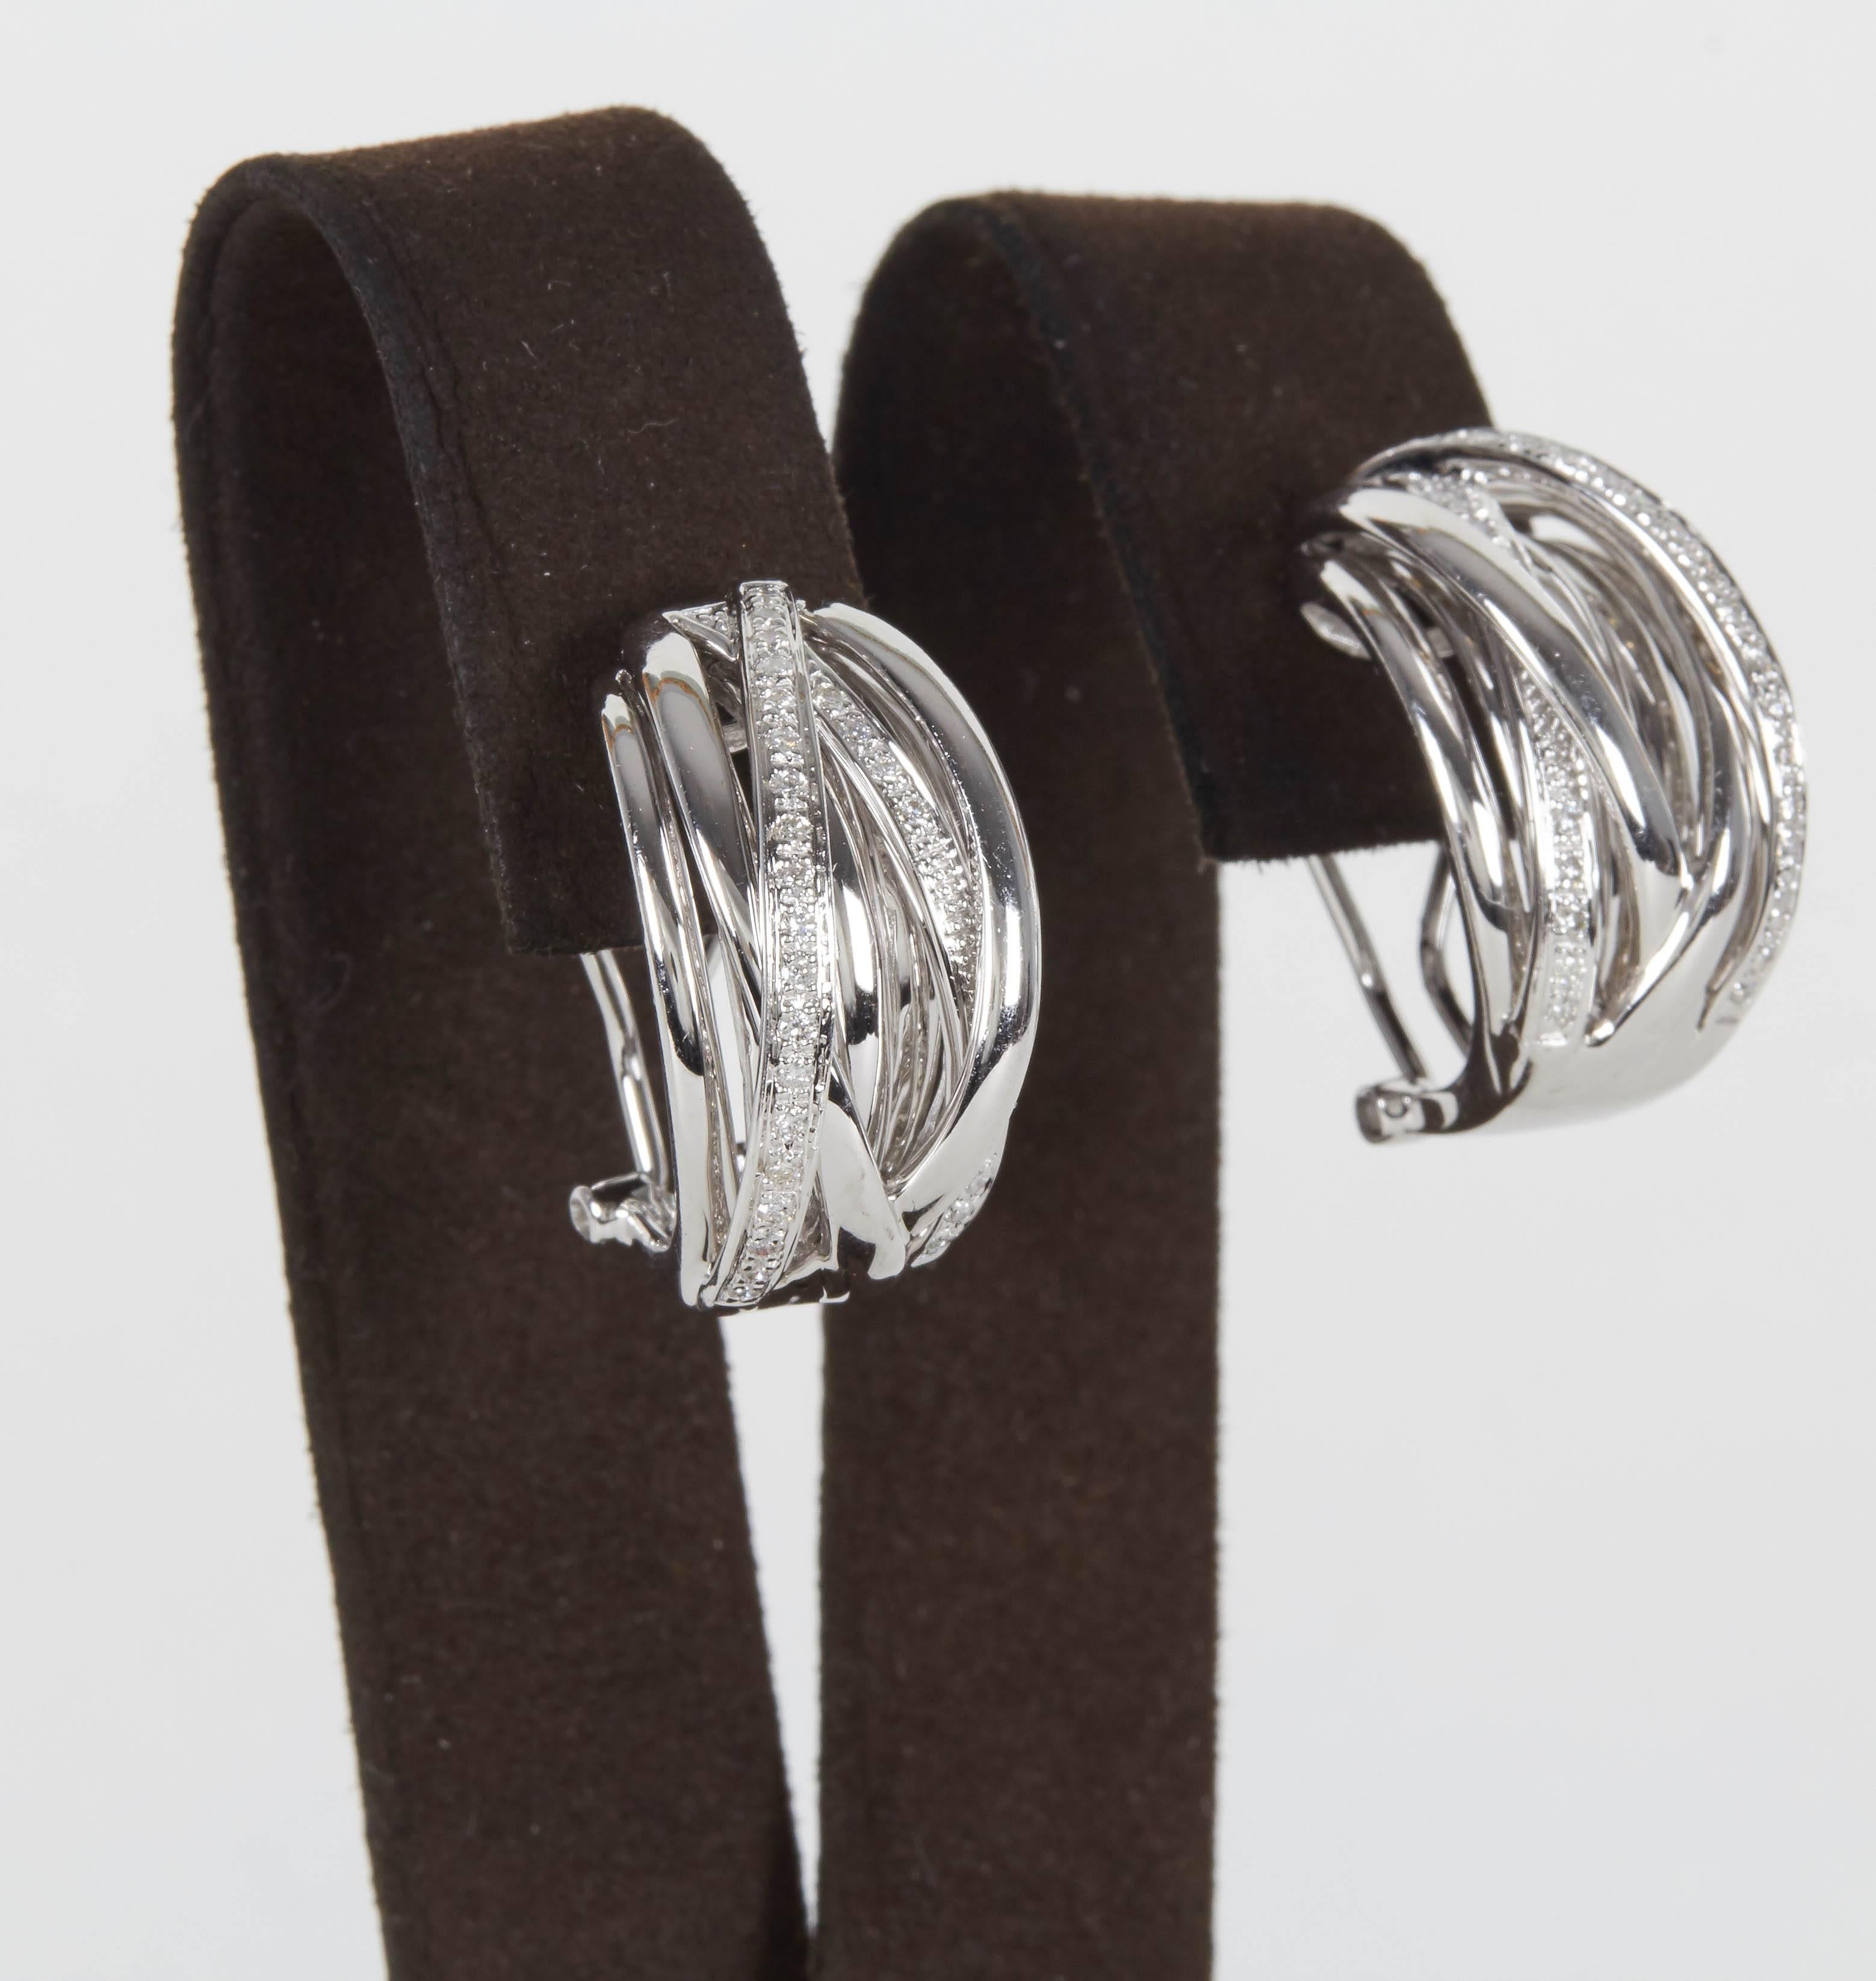 

A great pair of fashionable earrings!

0.44 carats of round brilliant cut diamonds set in 18k white gold.

Approx 0.80 inches in length and 0.50 inches in width. 

Perfect gift or addition to any collection.